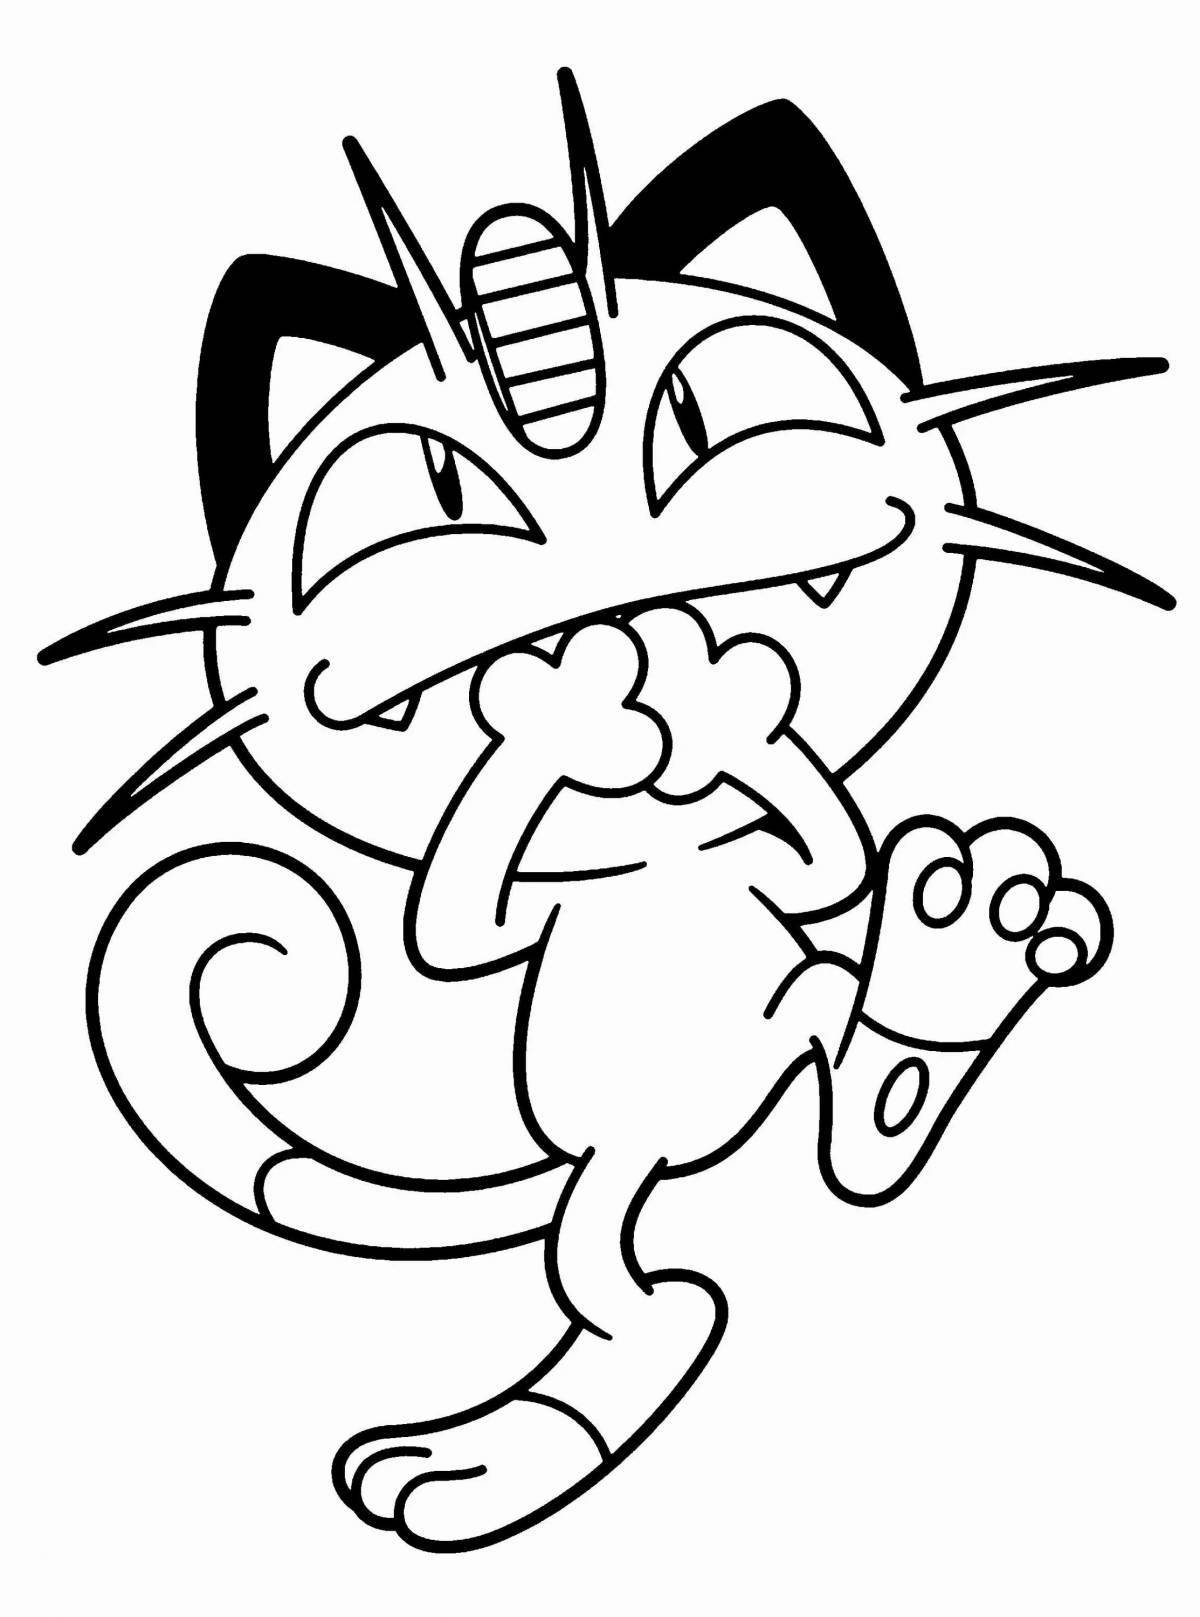 Grinning meowth coloring page